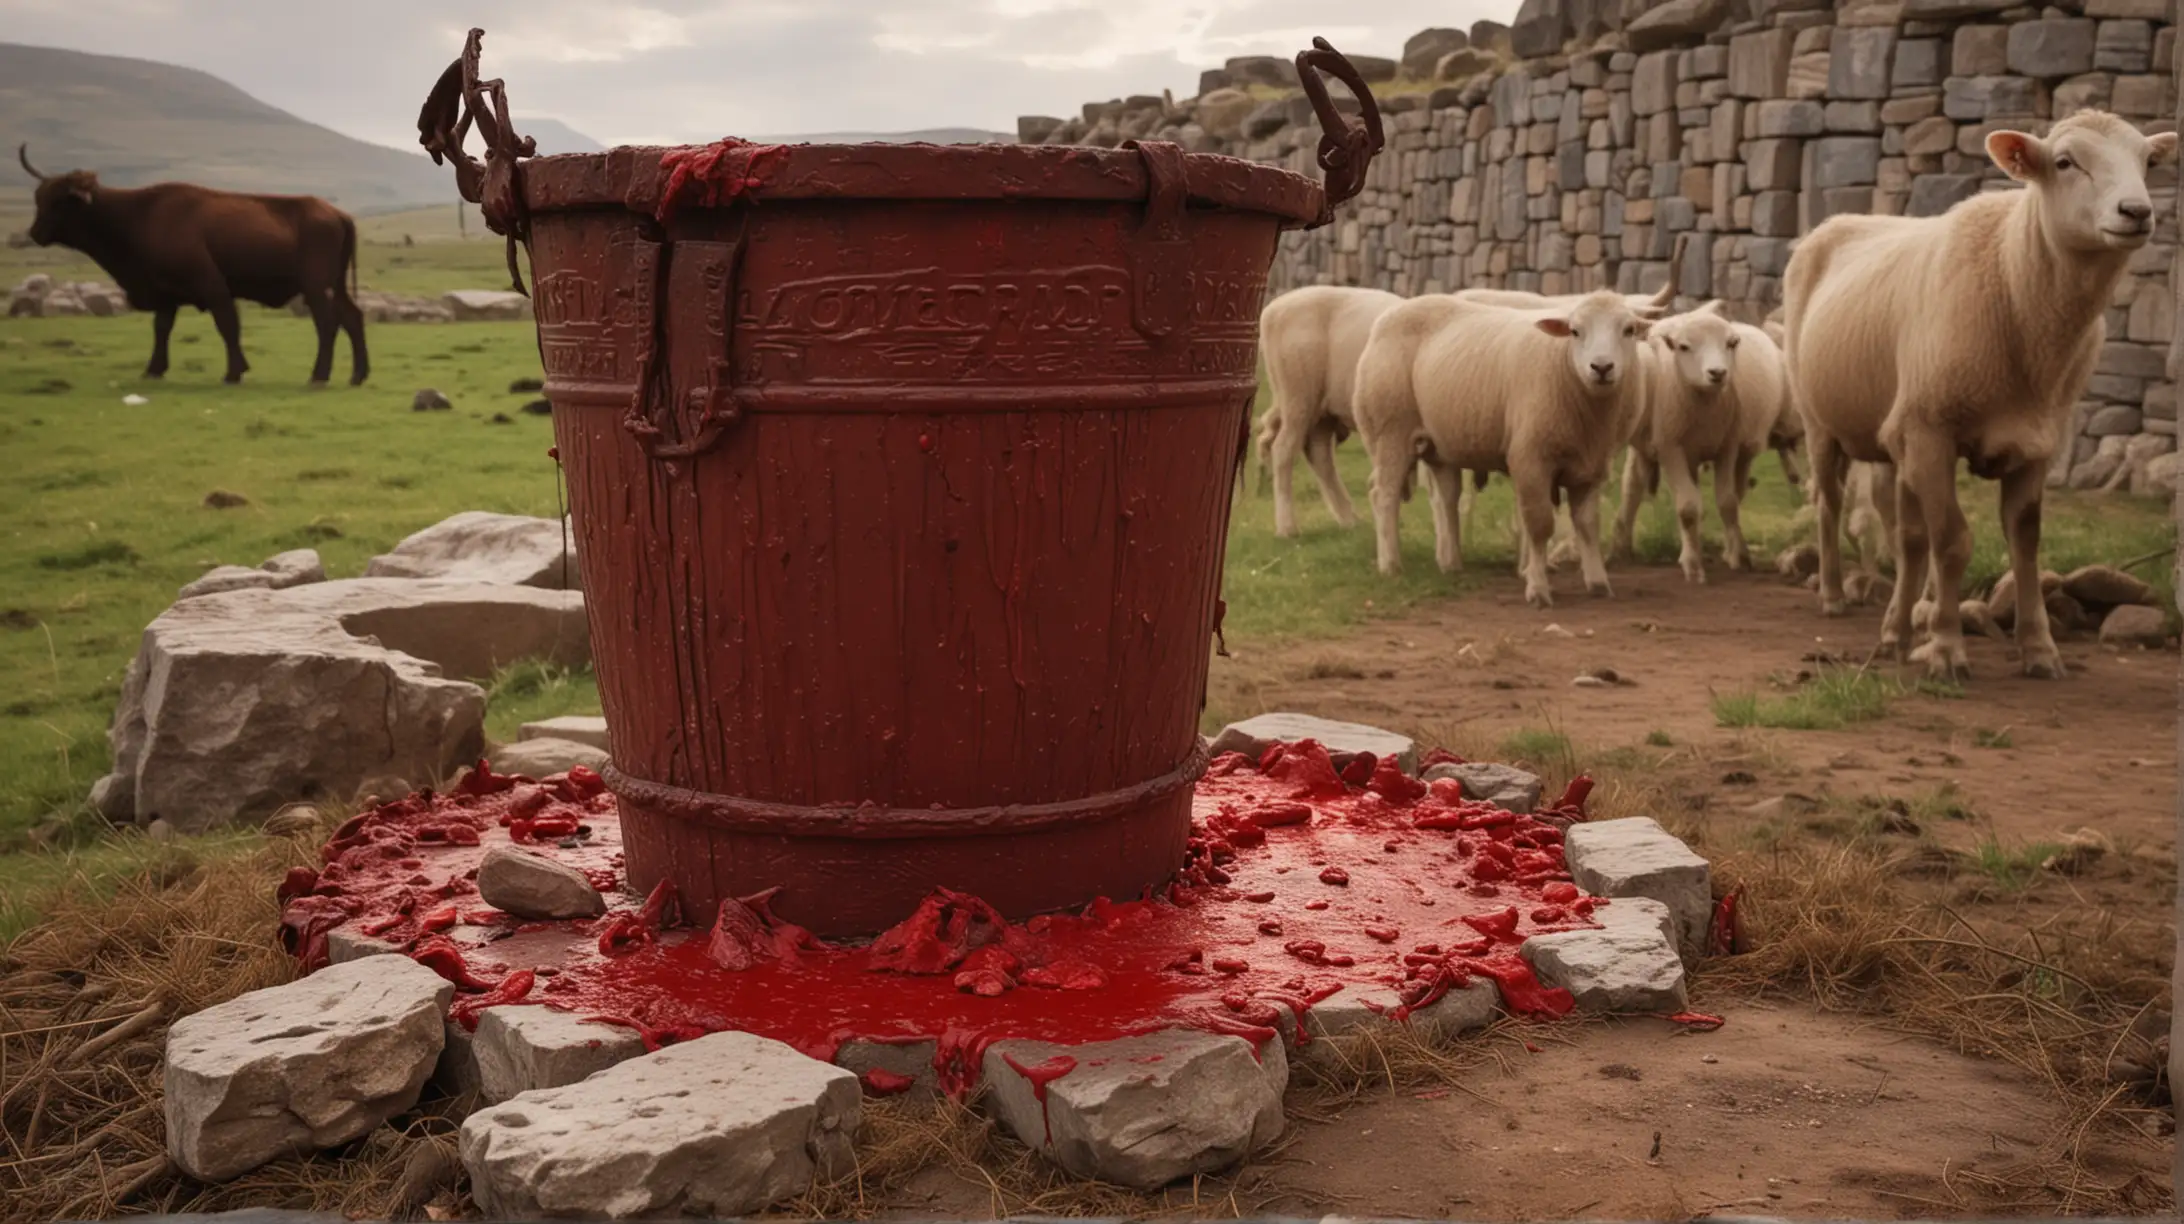 A close up of a bucket of red paint, with some oxen and lambs and a flaming sacrificial stone altar in the background, in the Era of the Biblcal Moses.